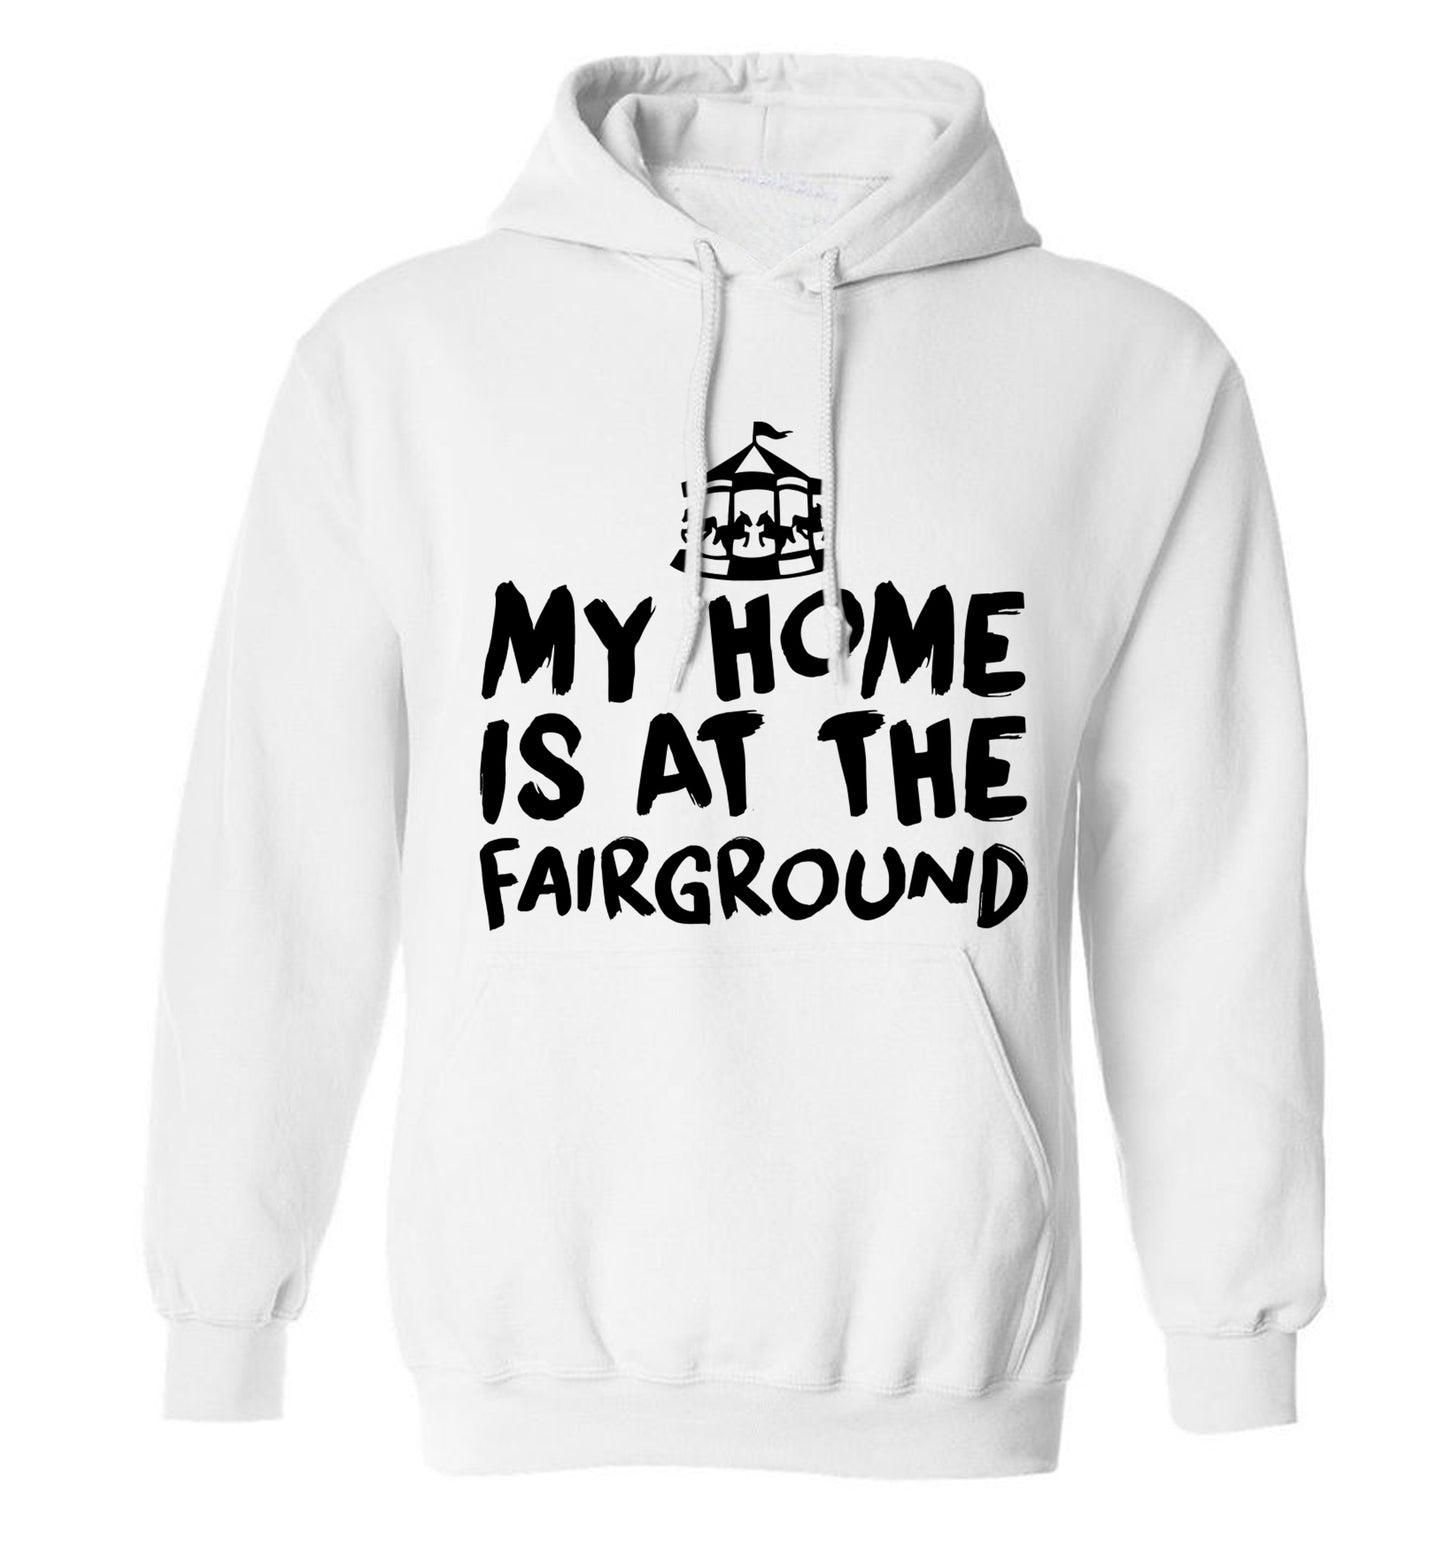 My home is at the fairground adults unisex white hoodie 2XL